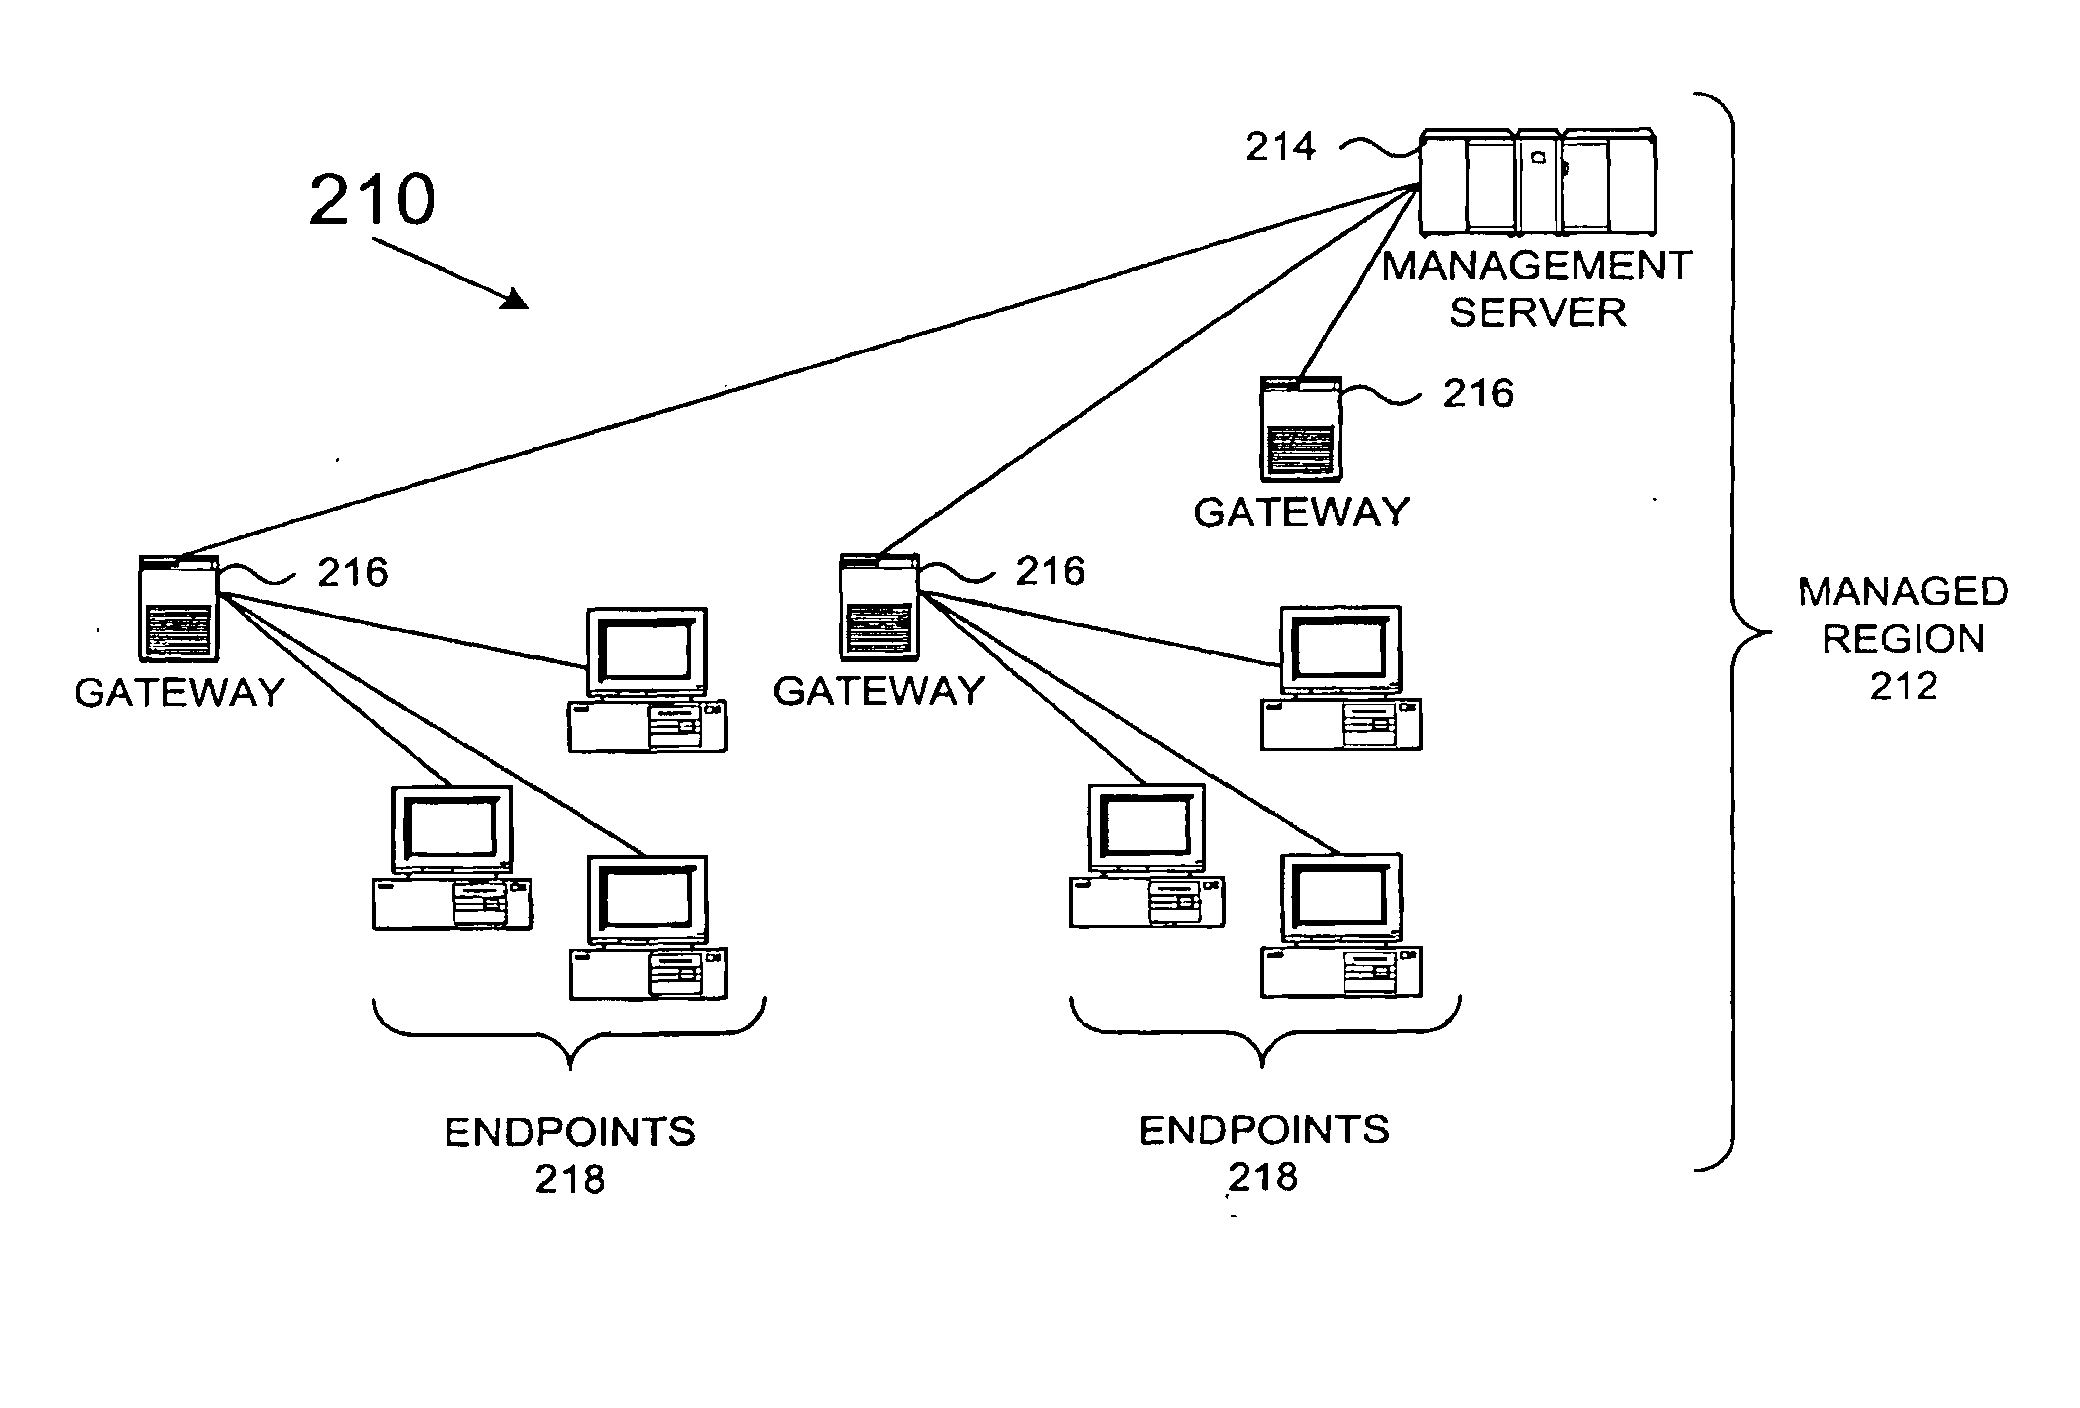 Method and System for Network Management with Platform-Independent Protocol Interface for Discovery and Monitoring Processes